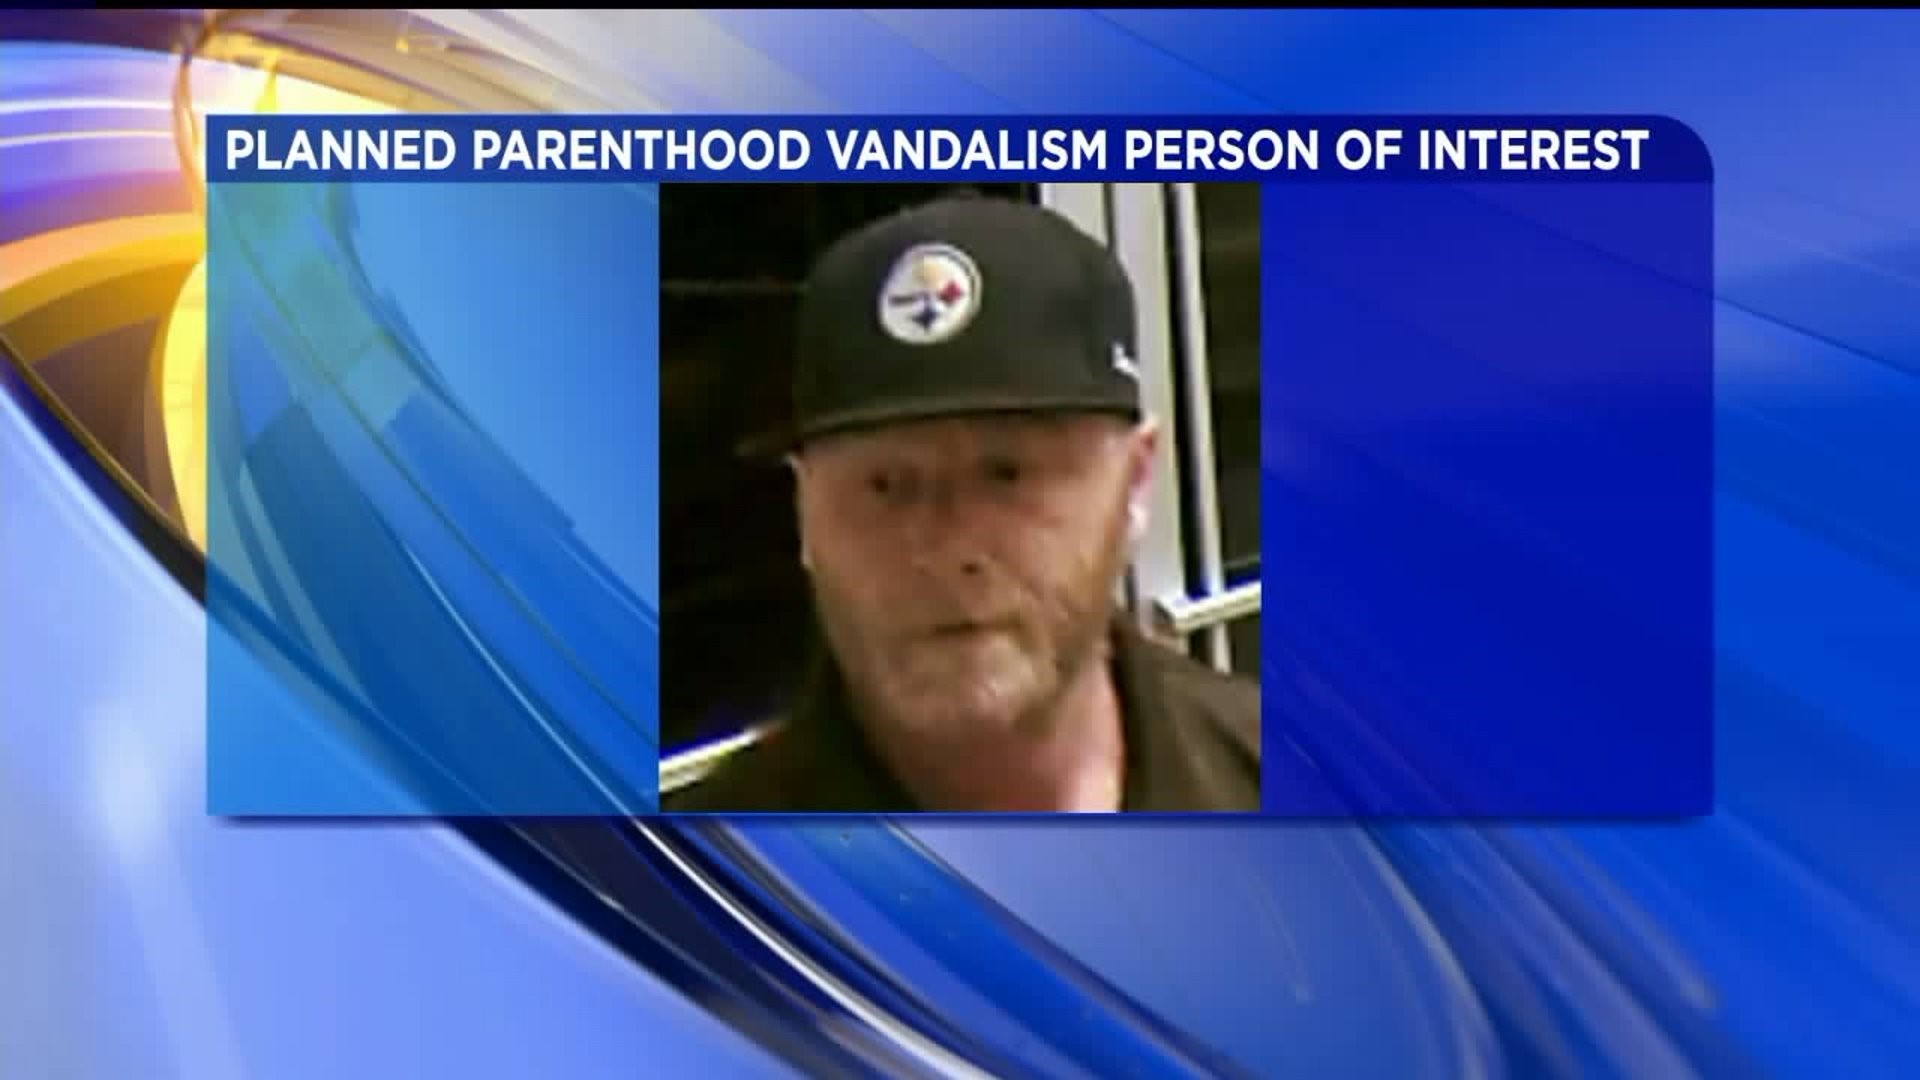 Planned Parenthood in Wilkes-Barre Vandalized, Security Camera Image Released